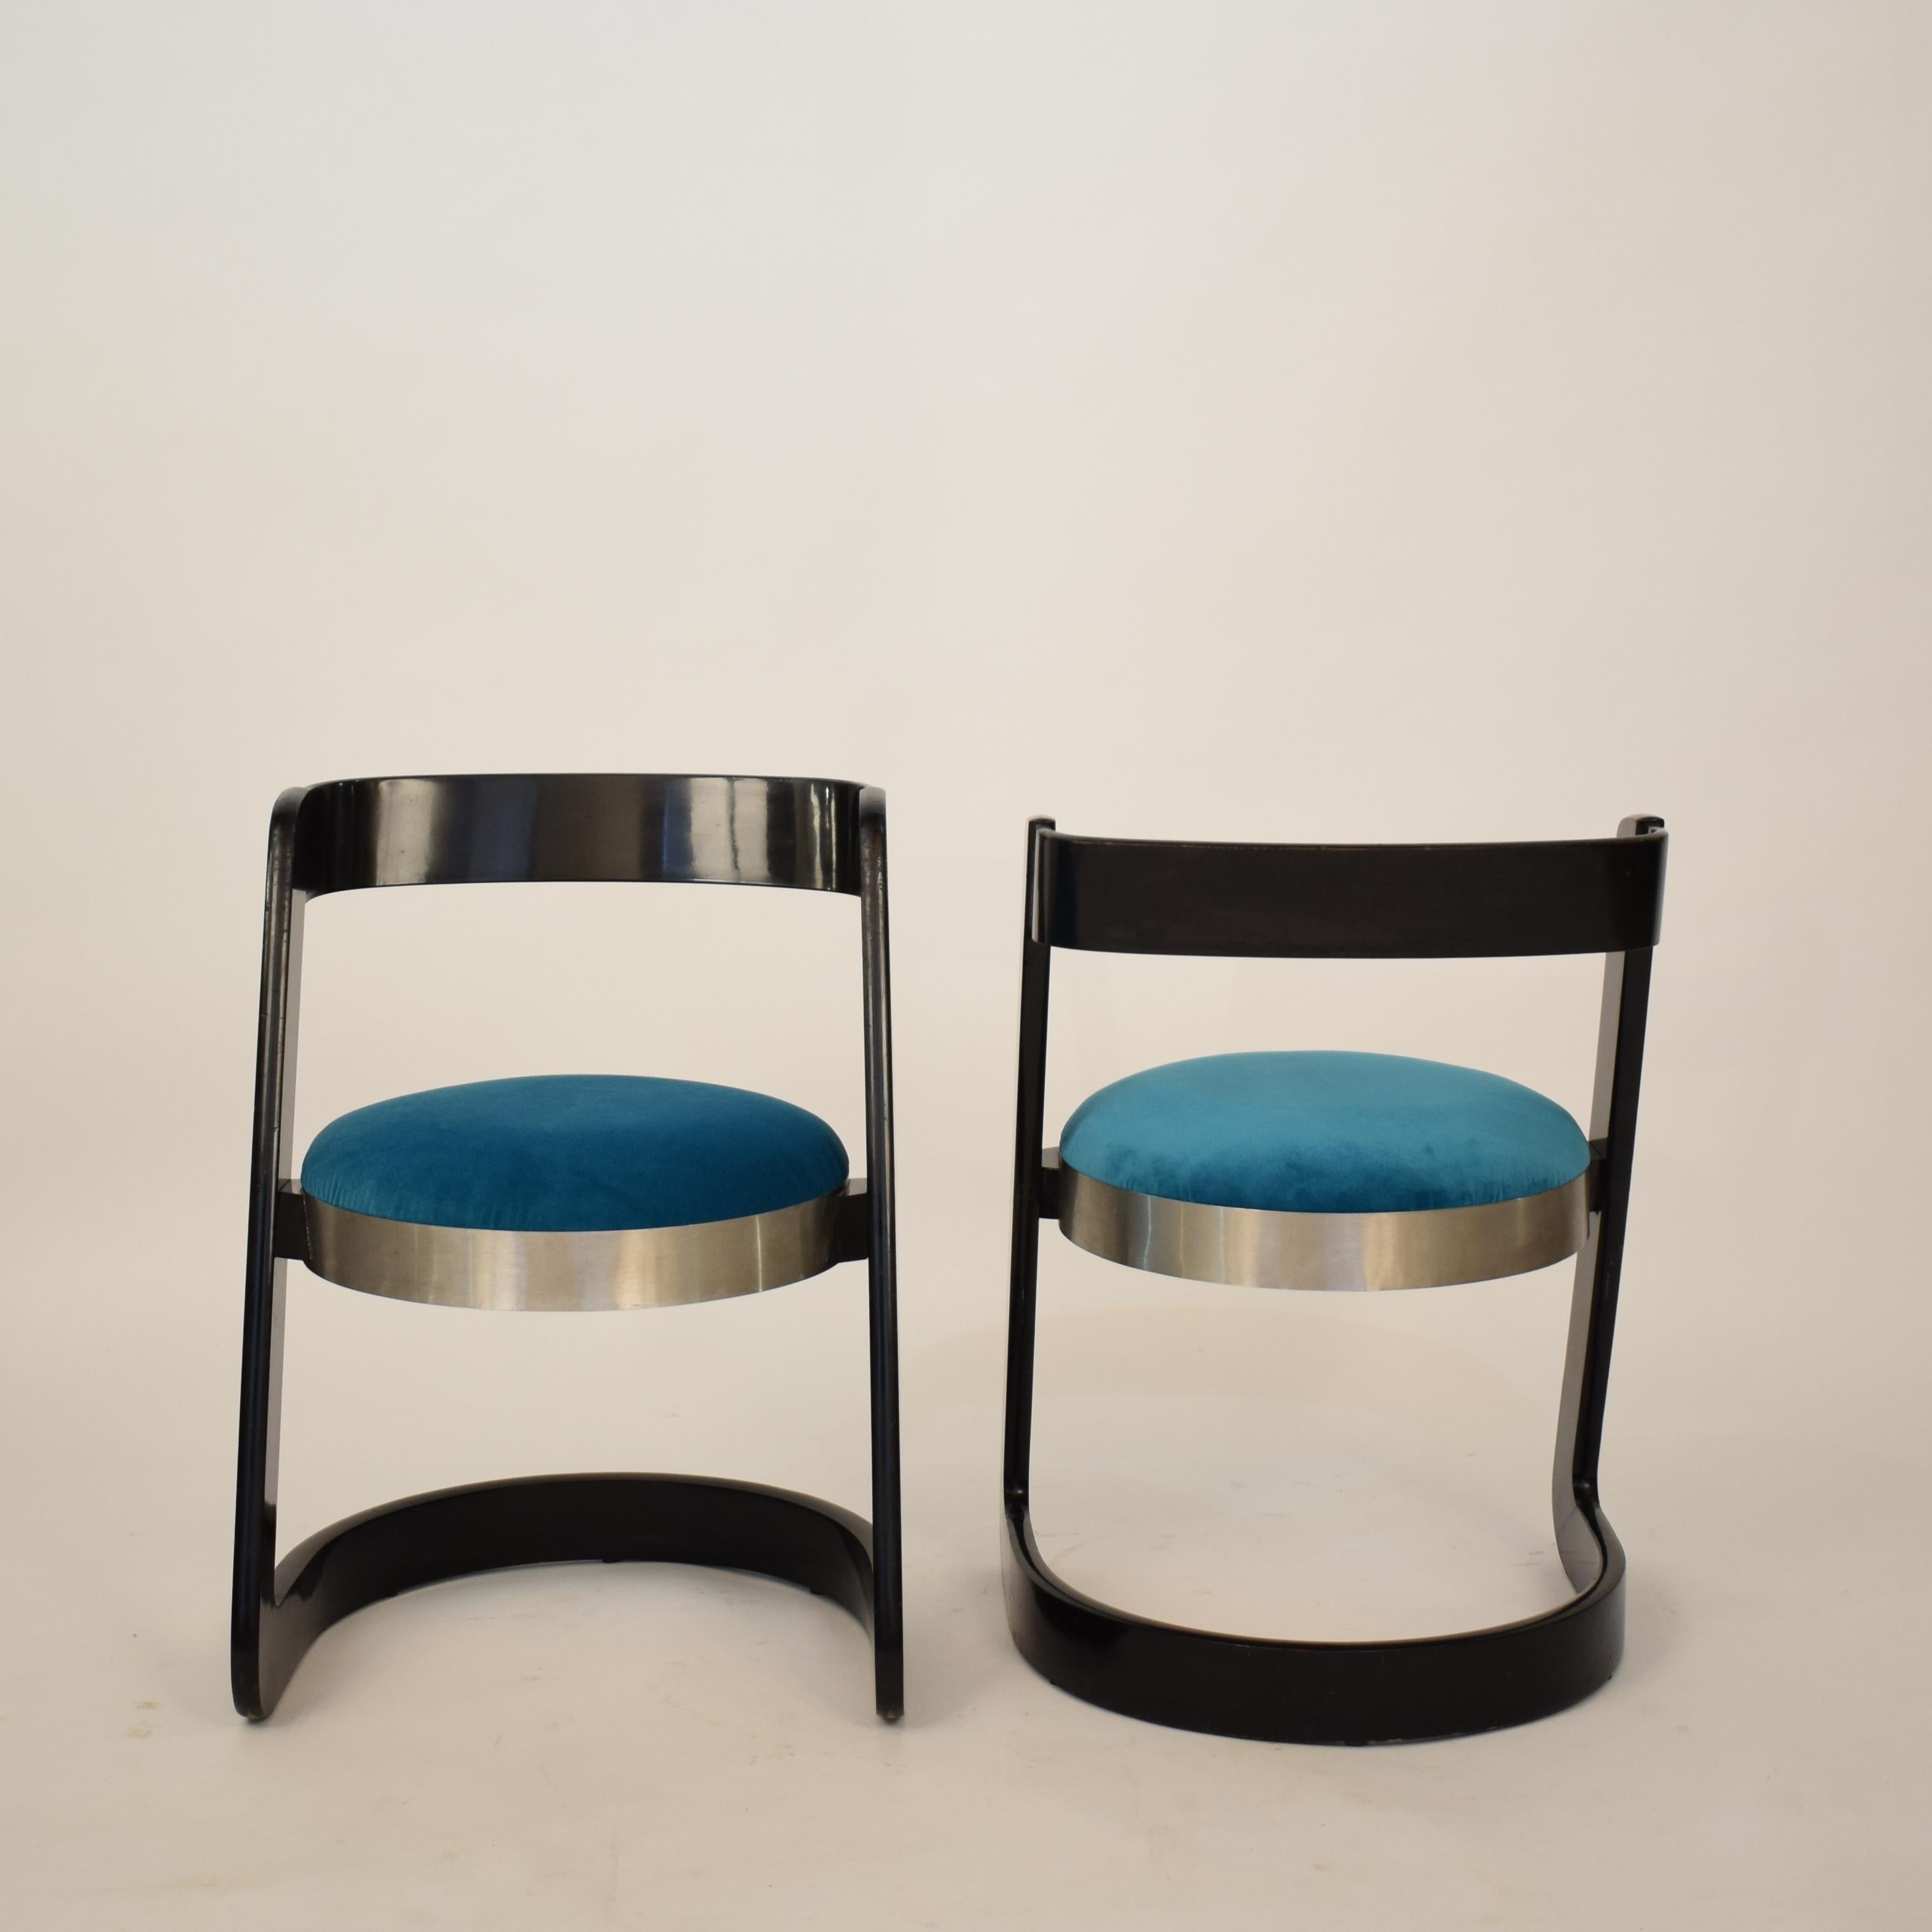 Two Chairs by Willy Rizzo Black Lacquered Wood and Velvet Seat for Mario Sabot 2